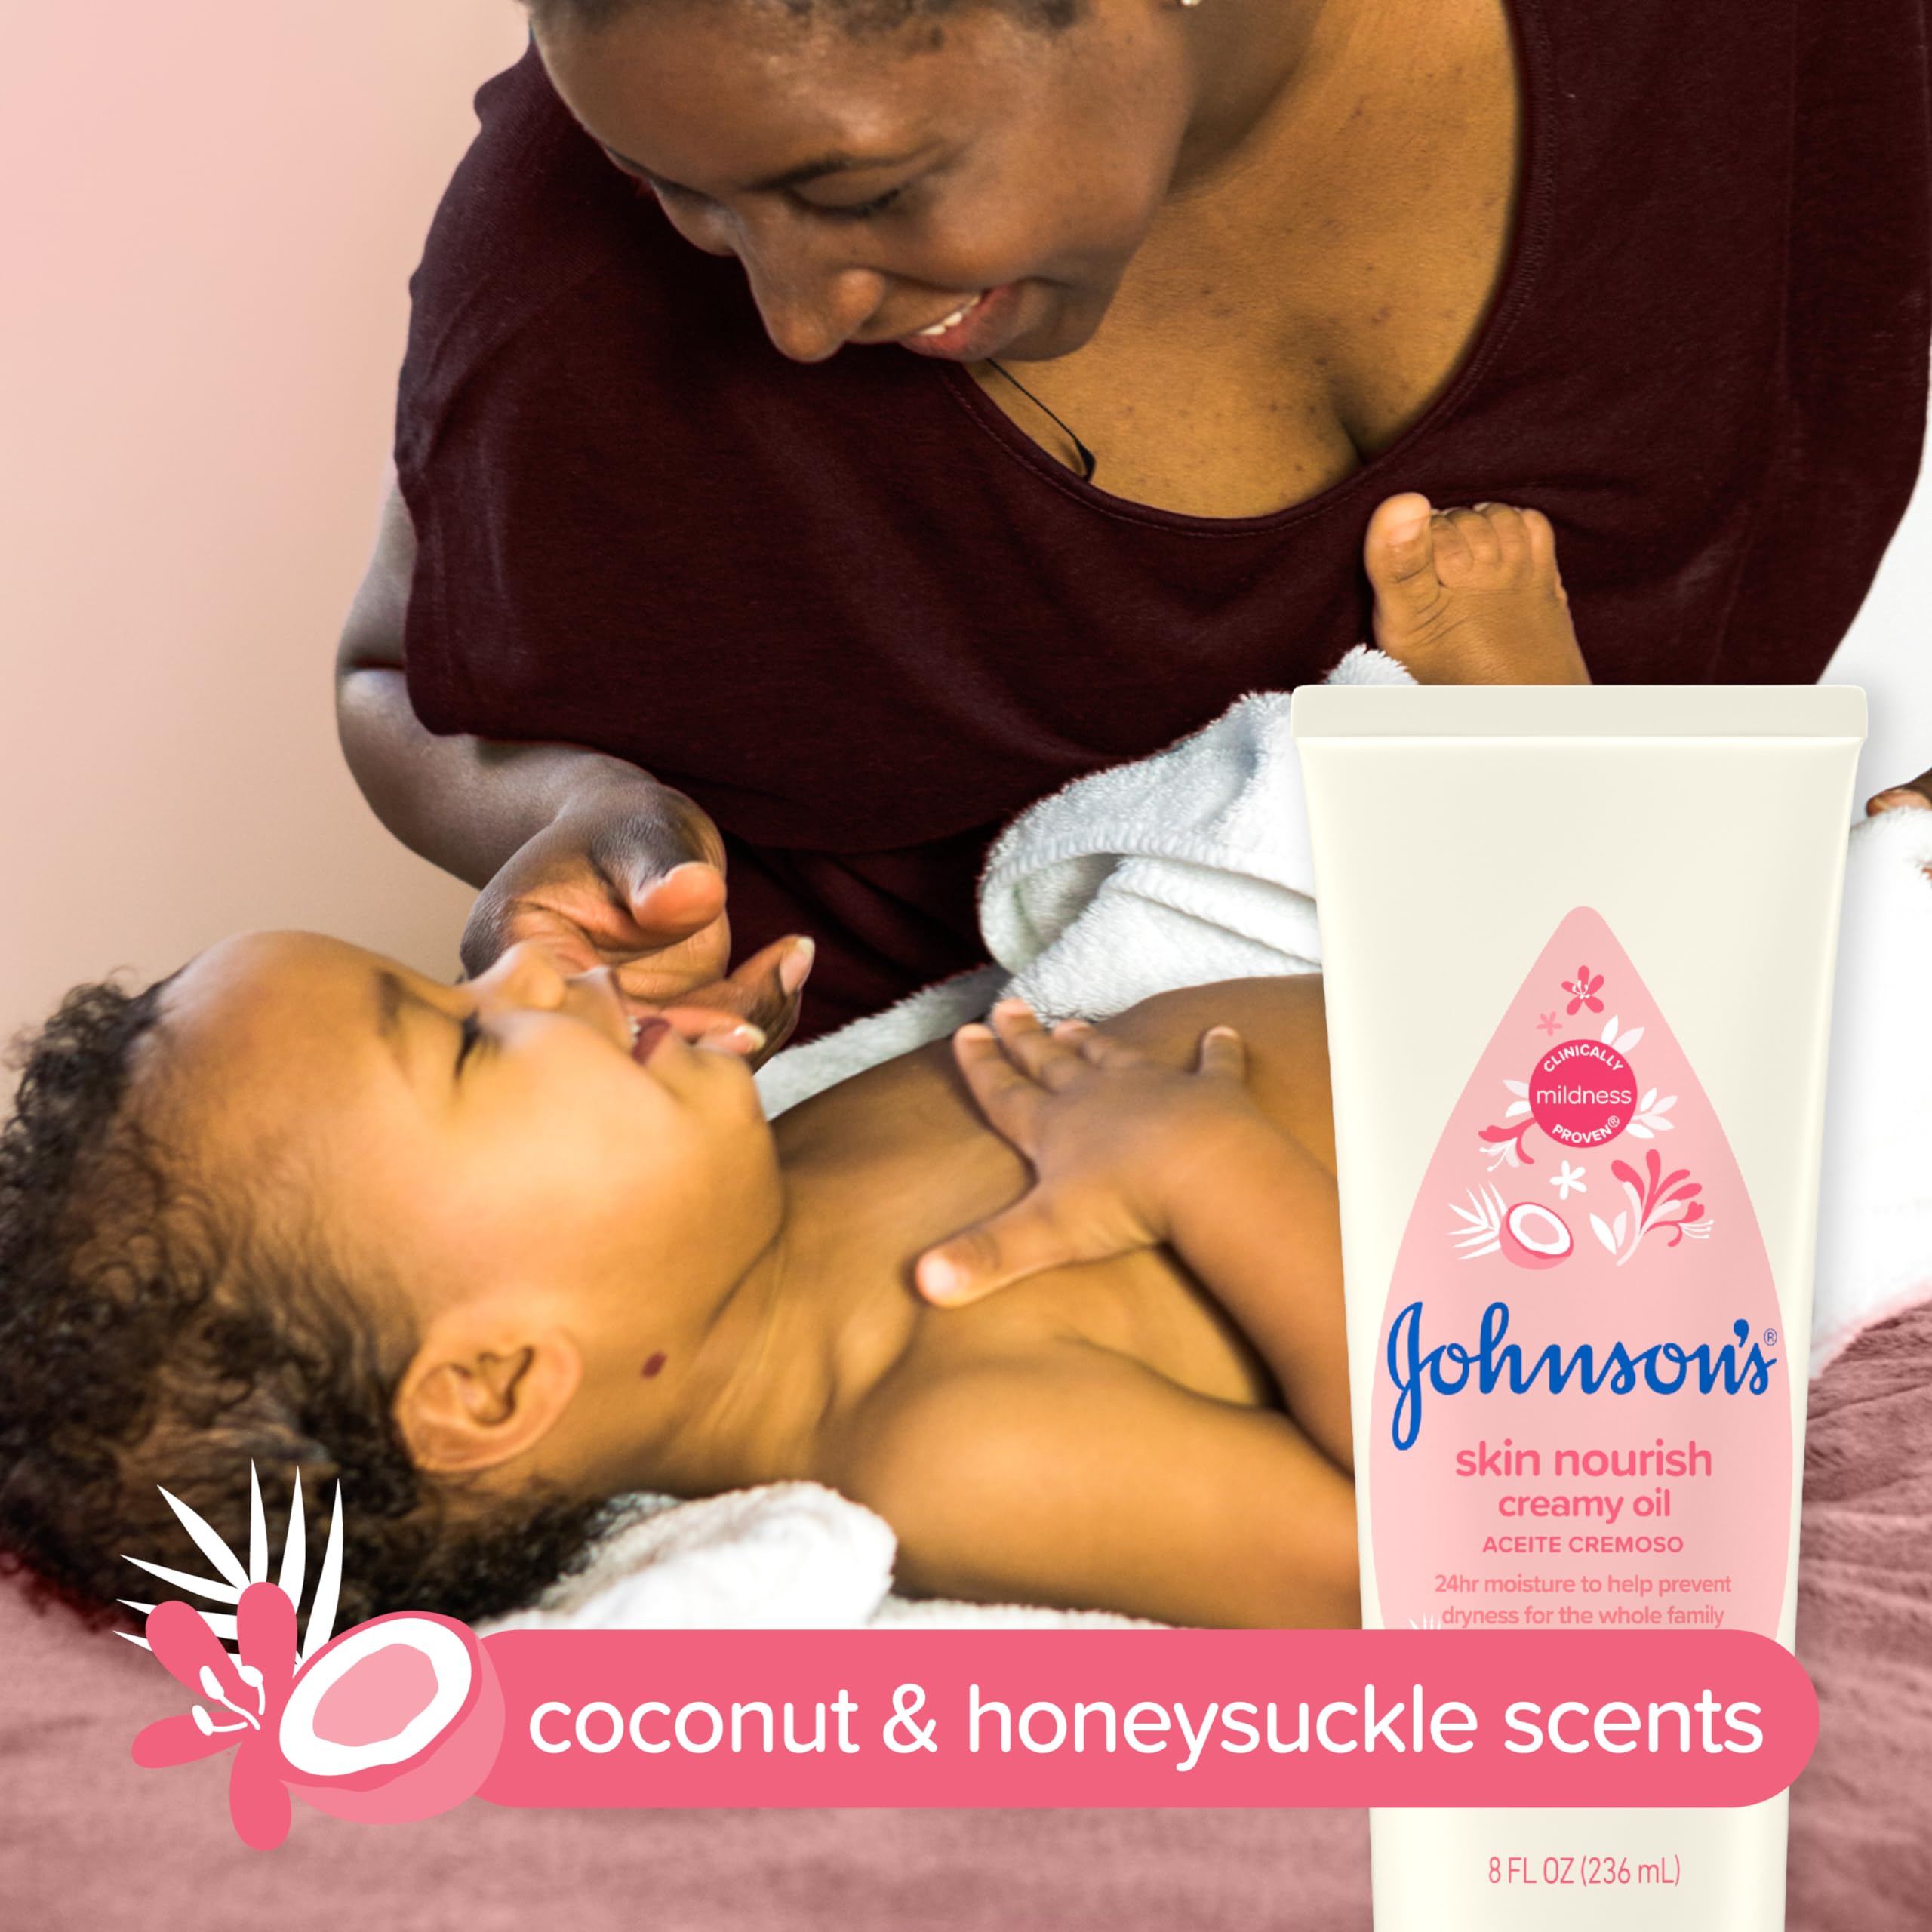 Johnson's Skin Nourish Creamy Baby Oil for Dry Skin with Coconut & Honeysuckle Scent, Rich & Creamy Baby Body Oil Moisturizes for 24 Hours & Helps Prevent Dryness, Hypoallergenic, 8 fl. Oz